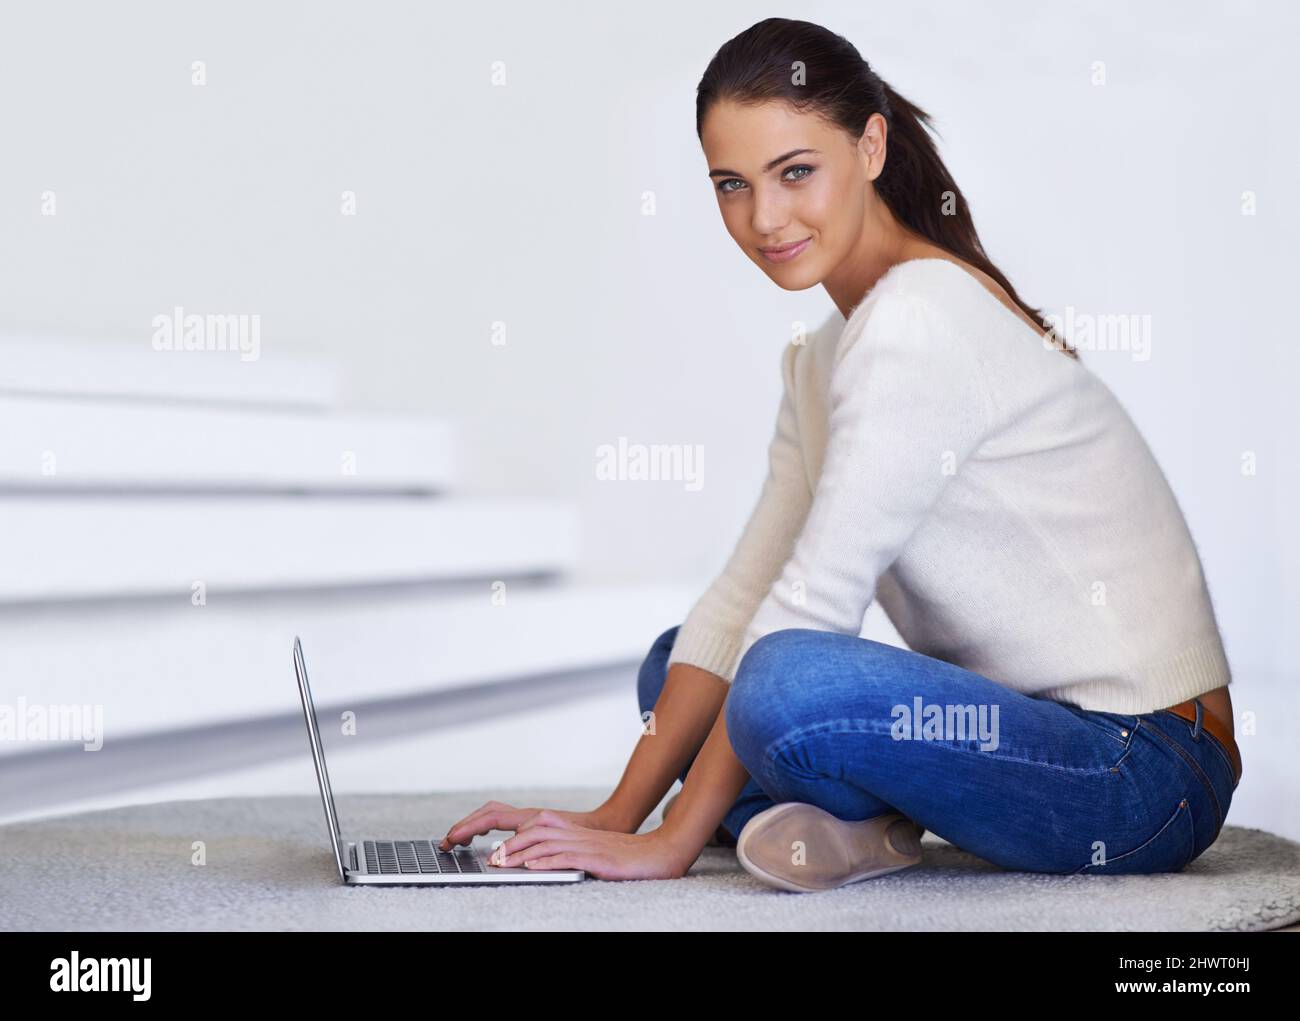 Comfortable connectivity. A beautiful young woman sitting on her floor and using a laptop. Stock Photo